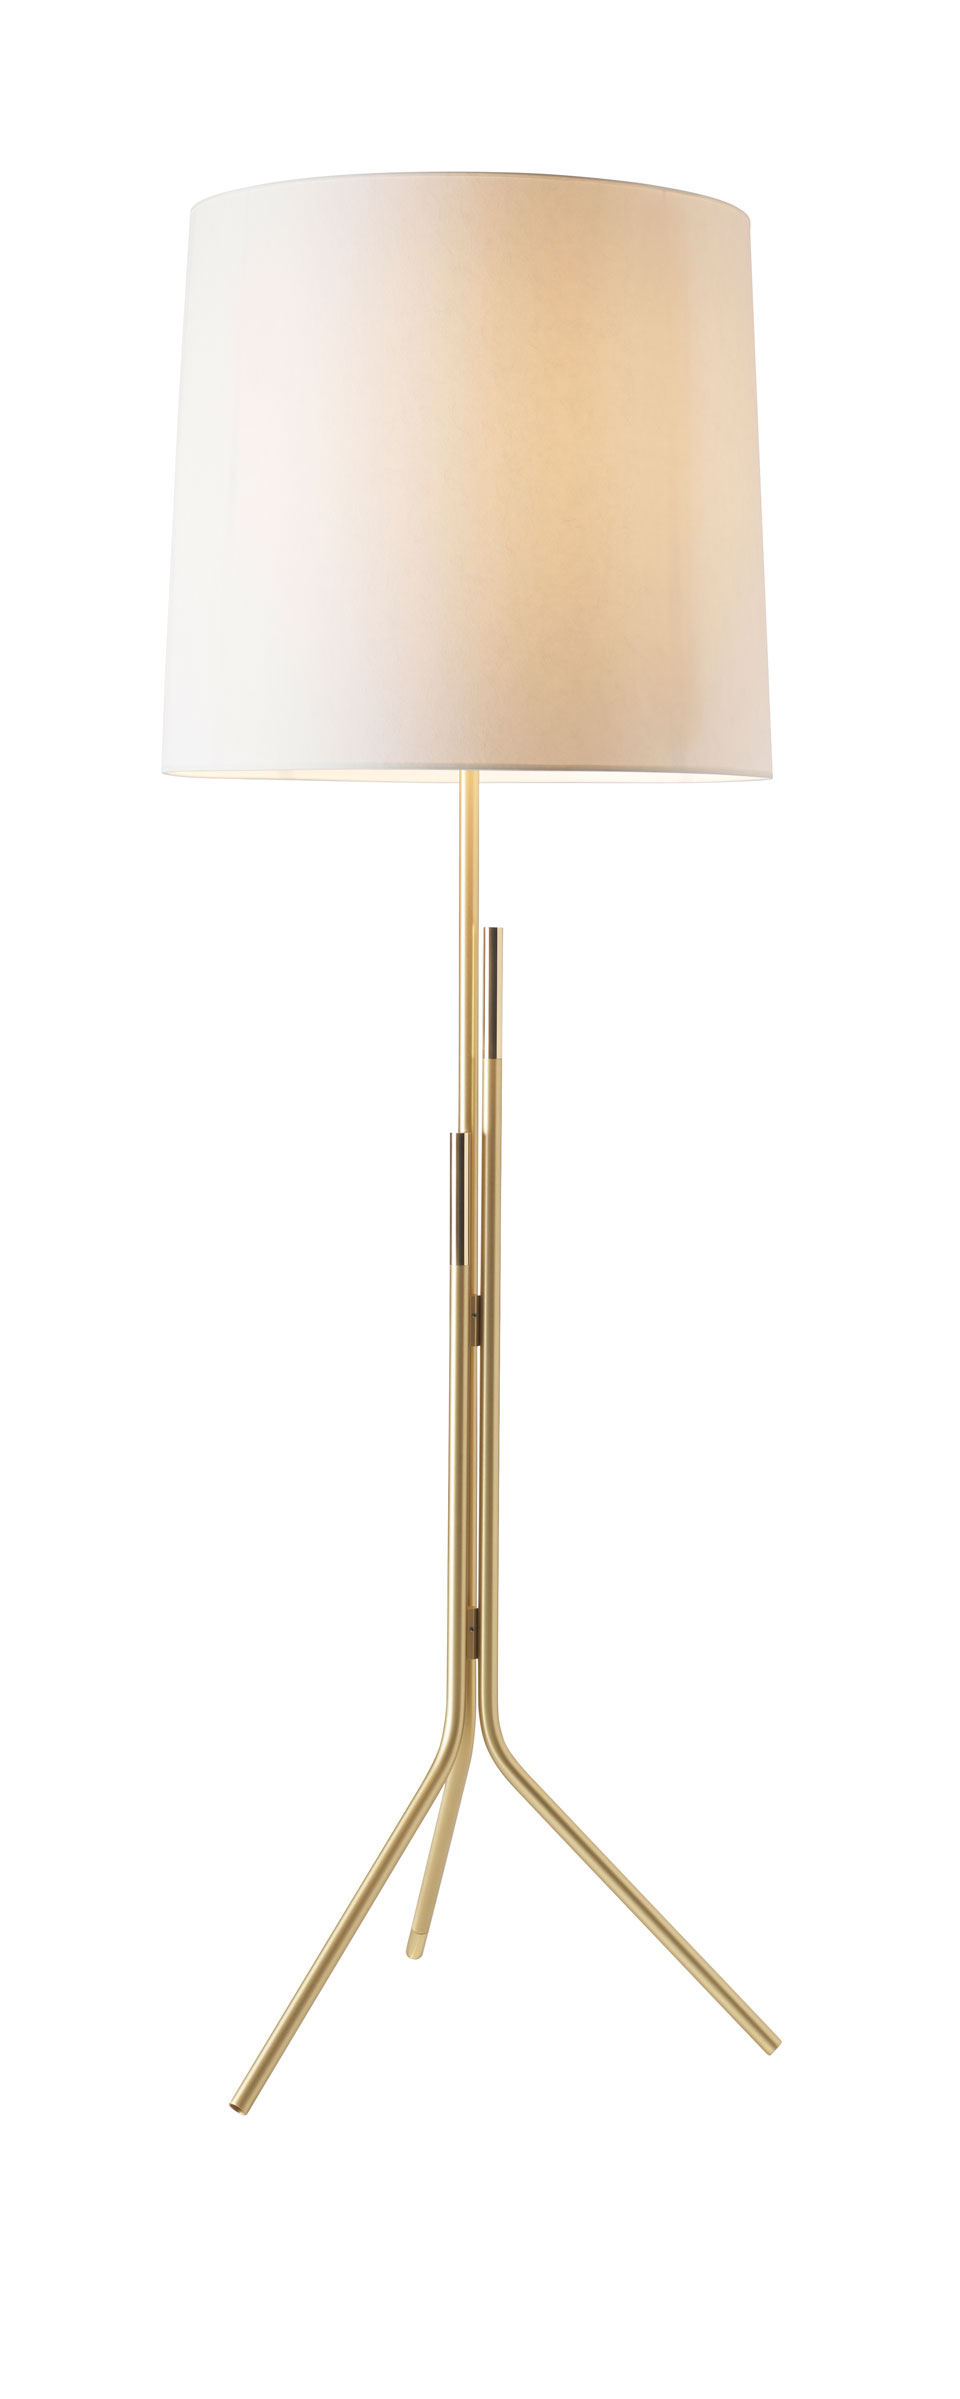 Contemporary Floor Lamp Brass Stand Cylindrical Shade In White Drop Paper Design Herv Langlais with sizing 960 X 2399